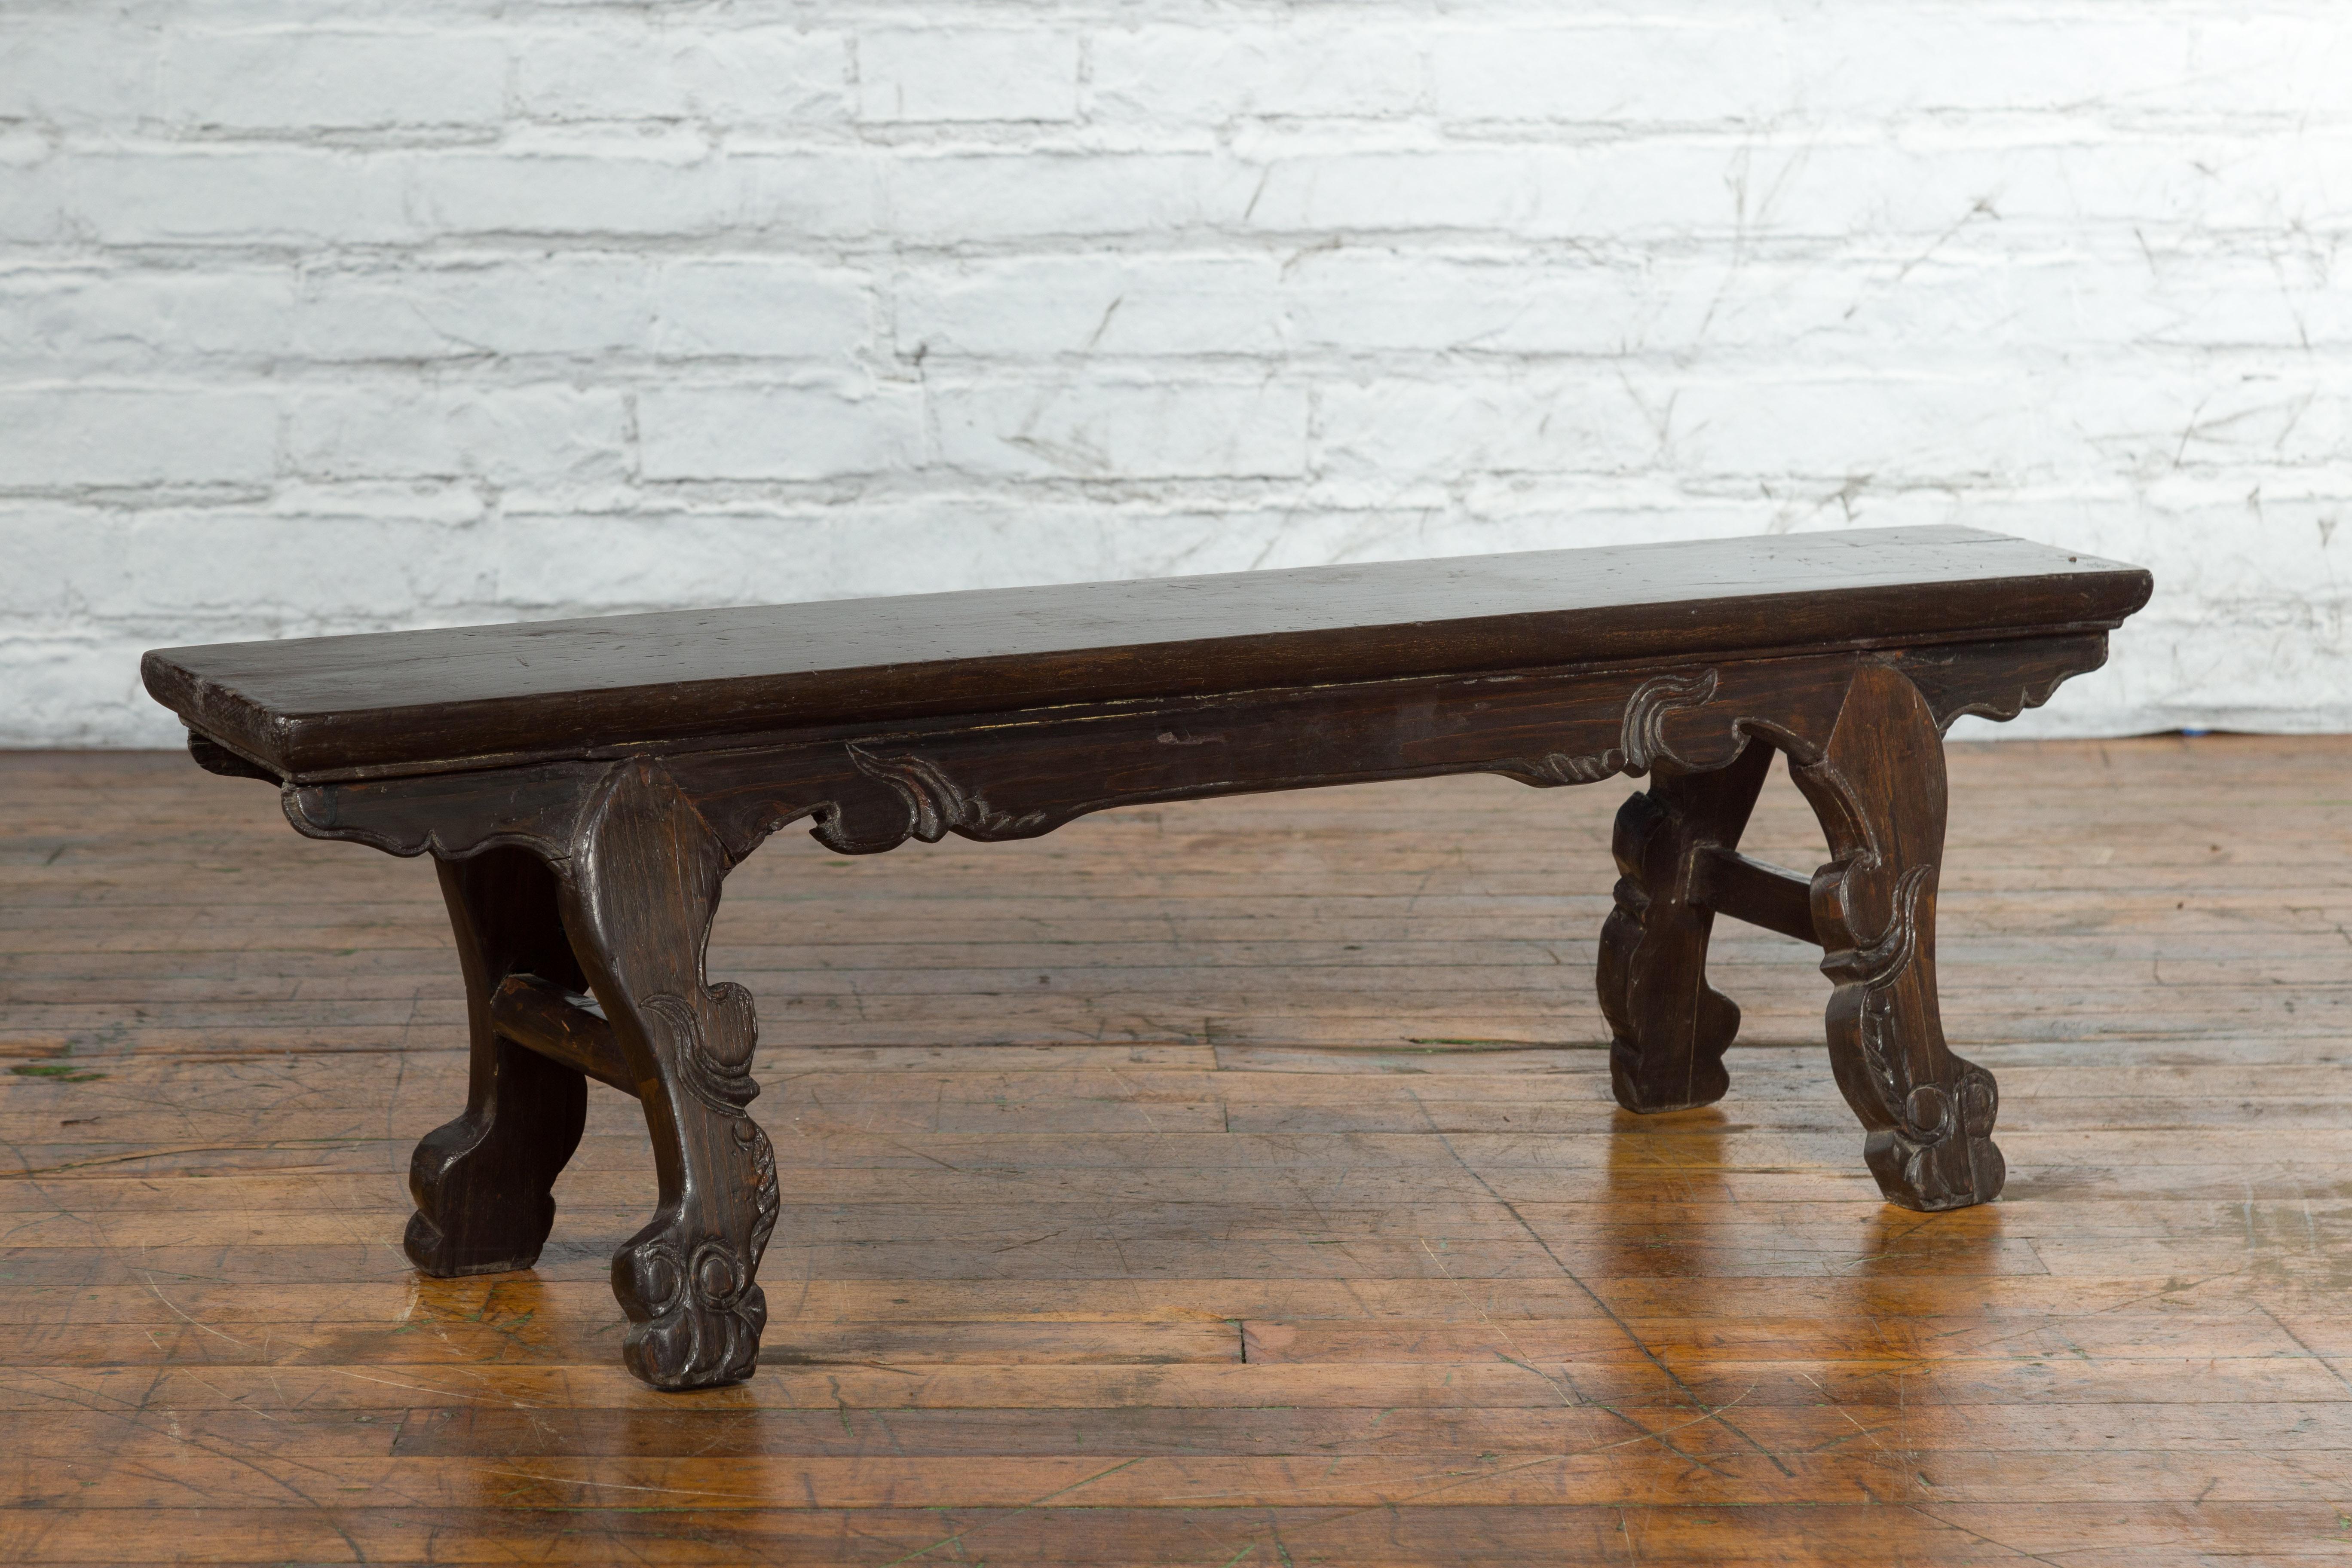 An antique Chinese low dark brown lacquered display table from the early 20th century with carved legs and apron. Created in China during the early years of the 20th century, this lacquered table features a narrow rectangular top sitting above an